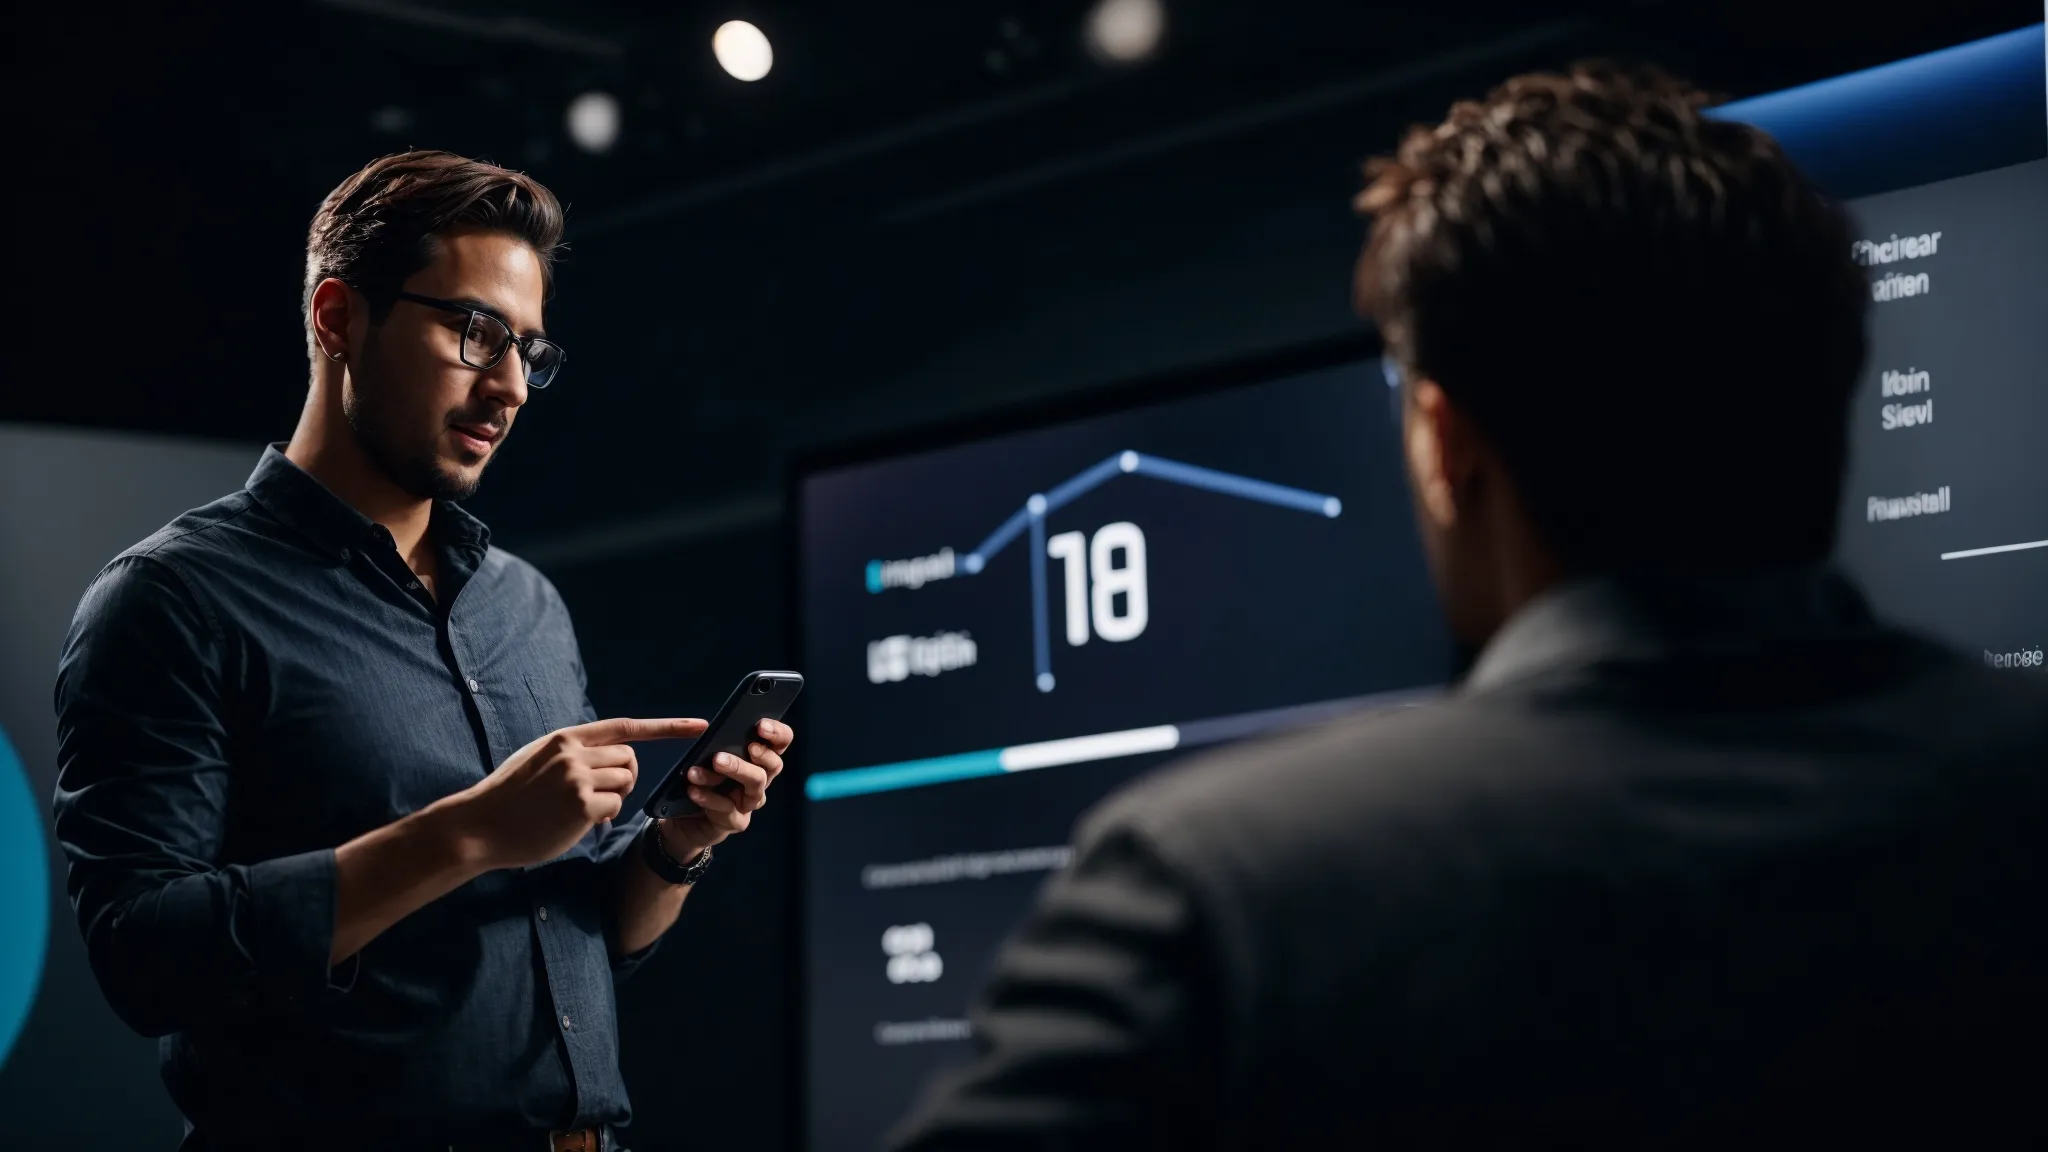 a marketer speaks into a smartphone, showcasing a voice search demonstration with a 2019 digital trend graph on the screen behind him.